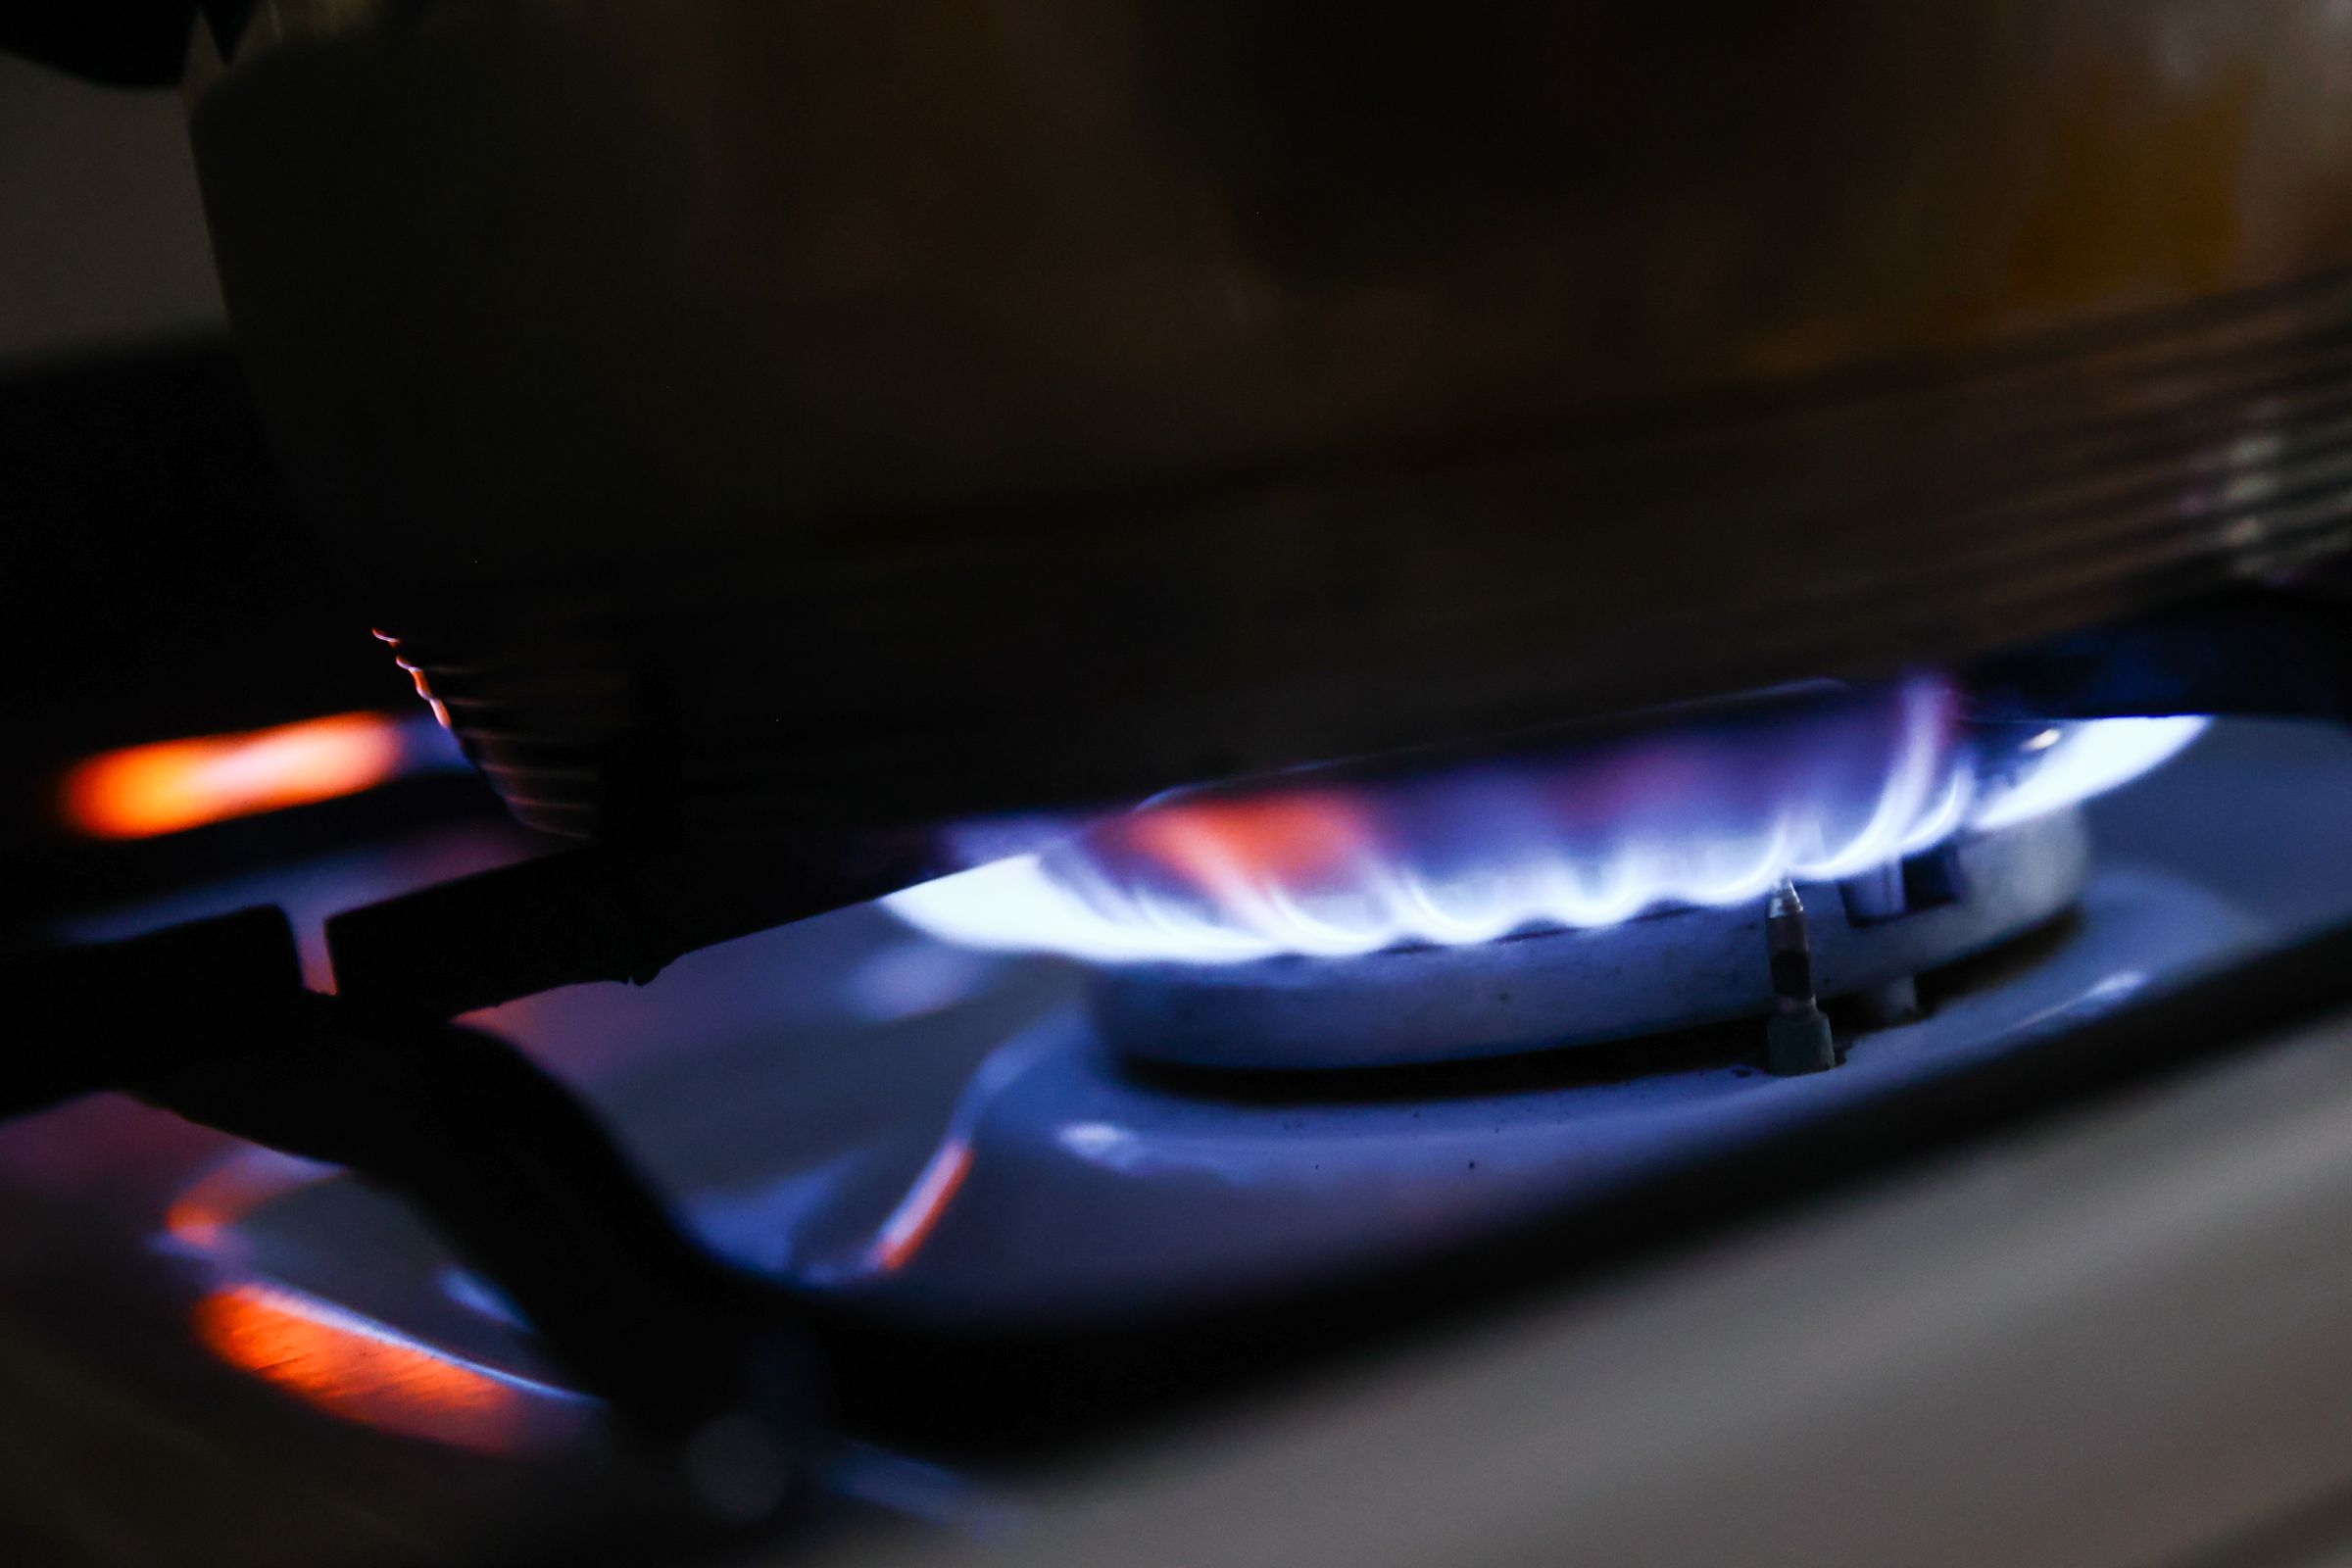 A lot gas burner with blue and orange flames.